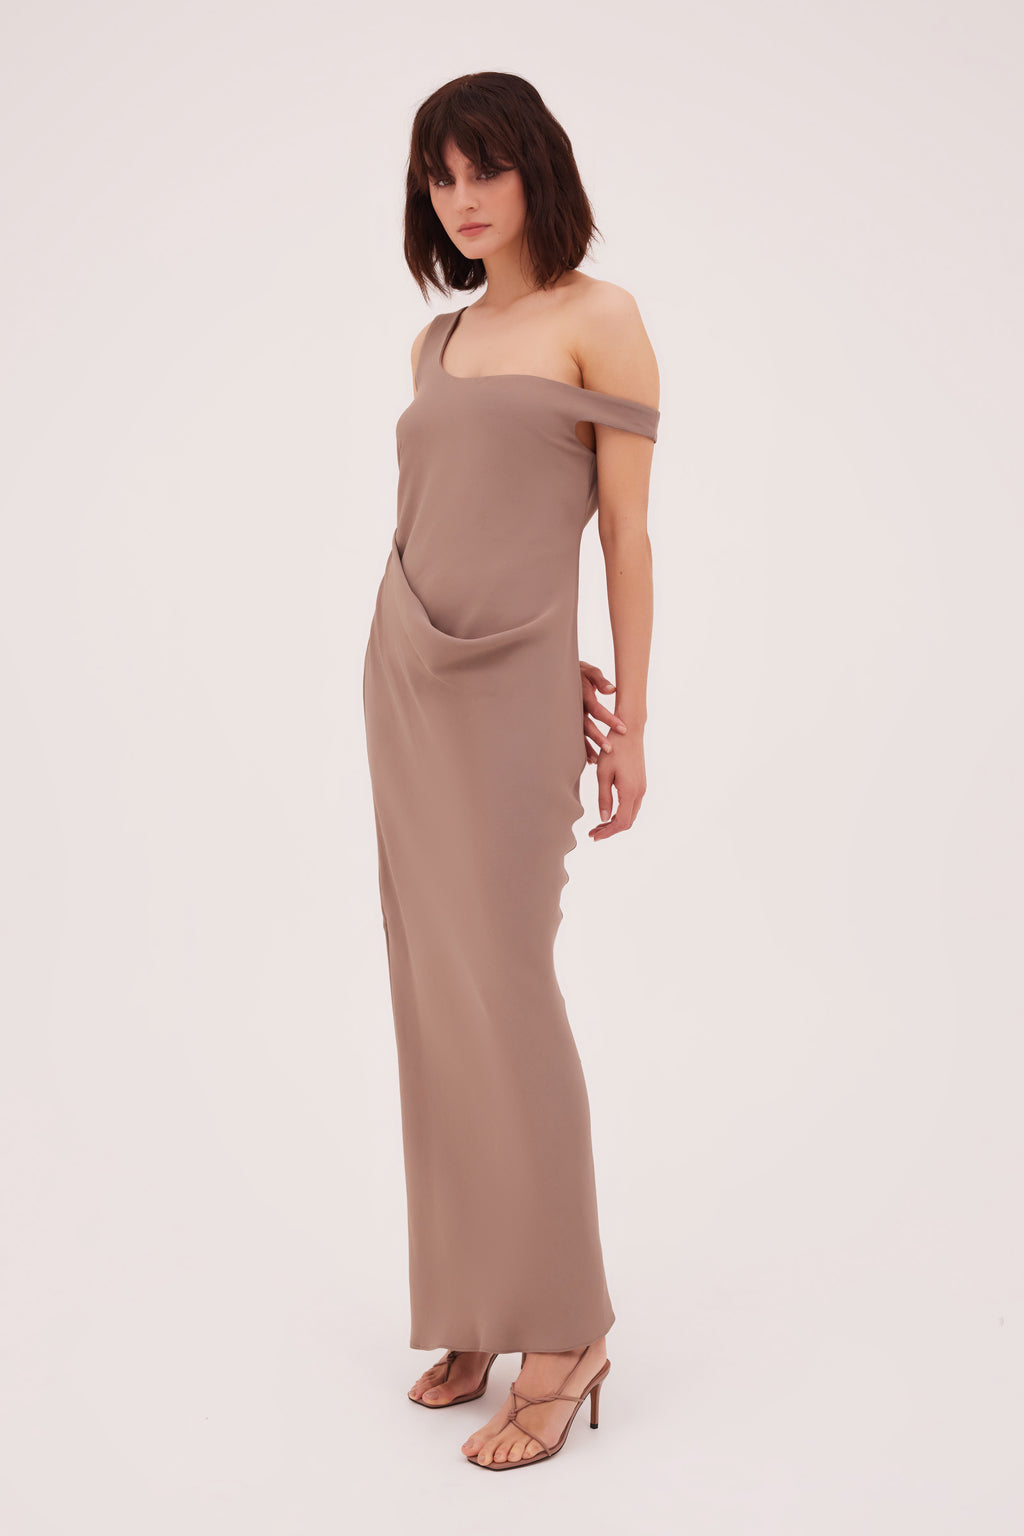 TAUPE SUITING LEONORA DRESS